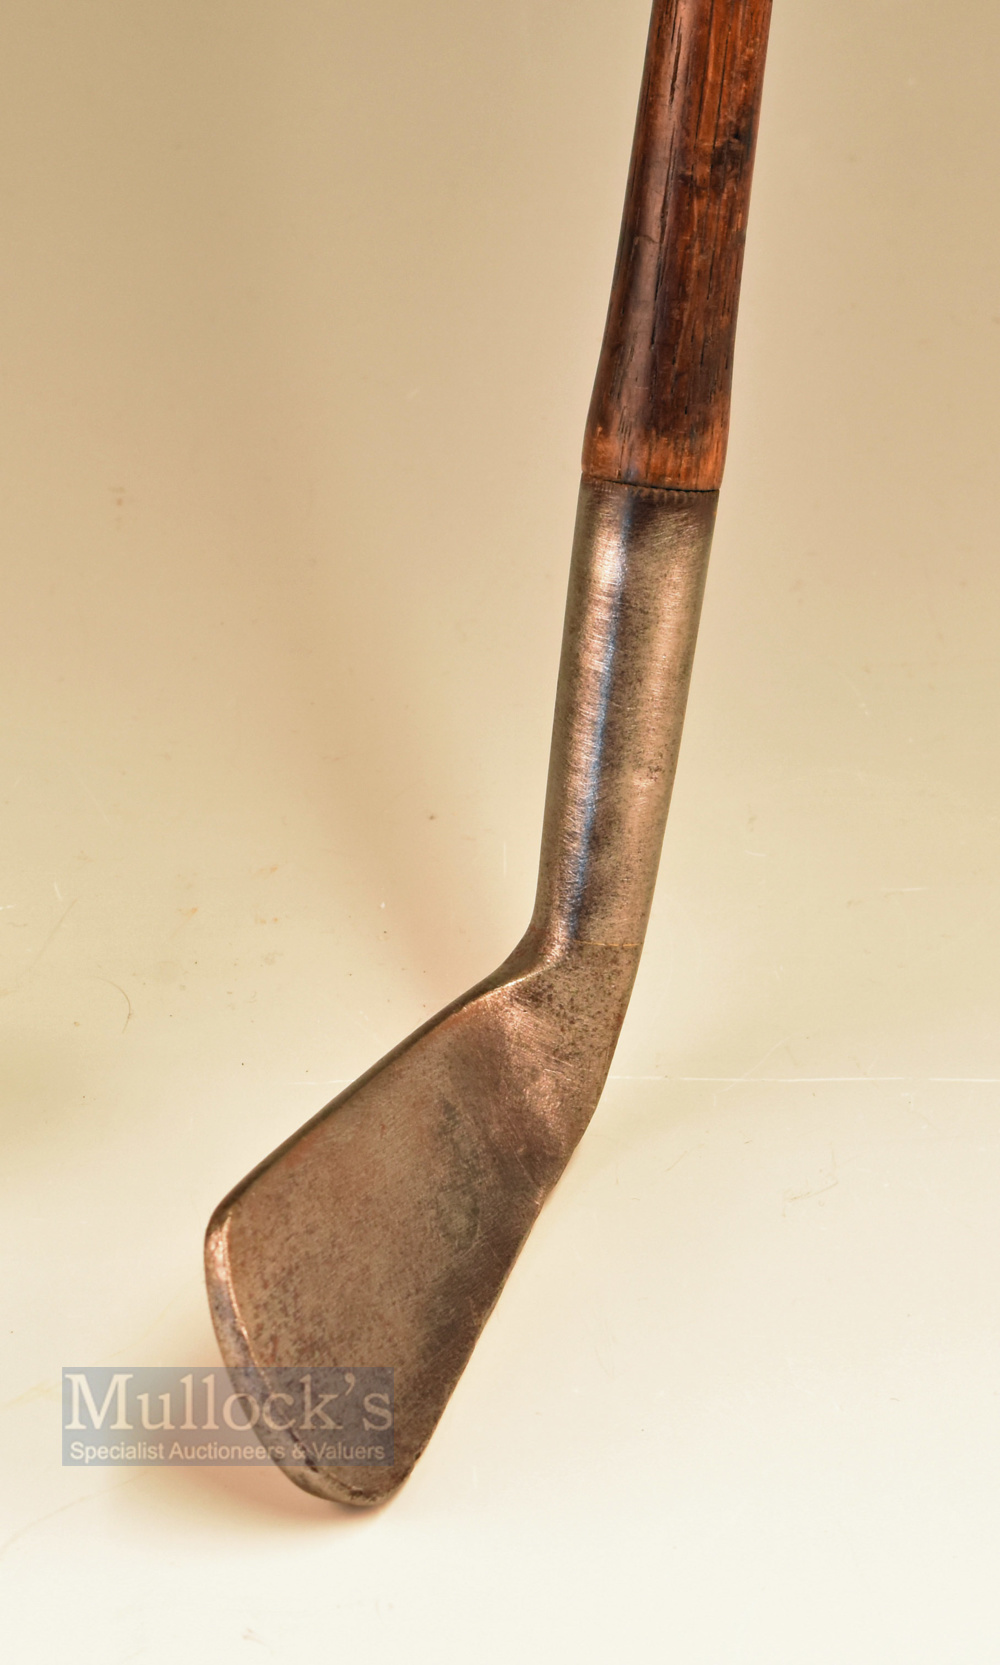 Rare Bussey London Patent steel socket neck mid iron - with concave face, bowed shaft fitted with